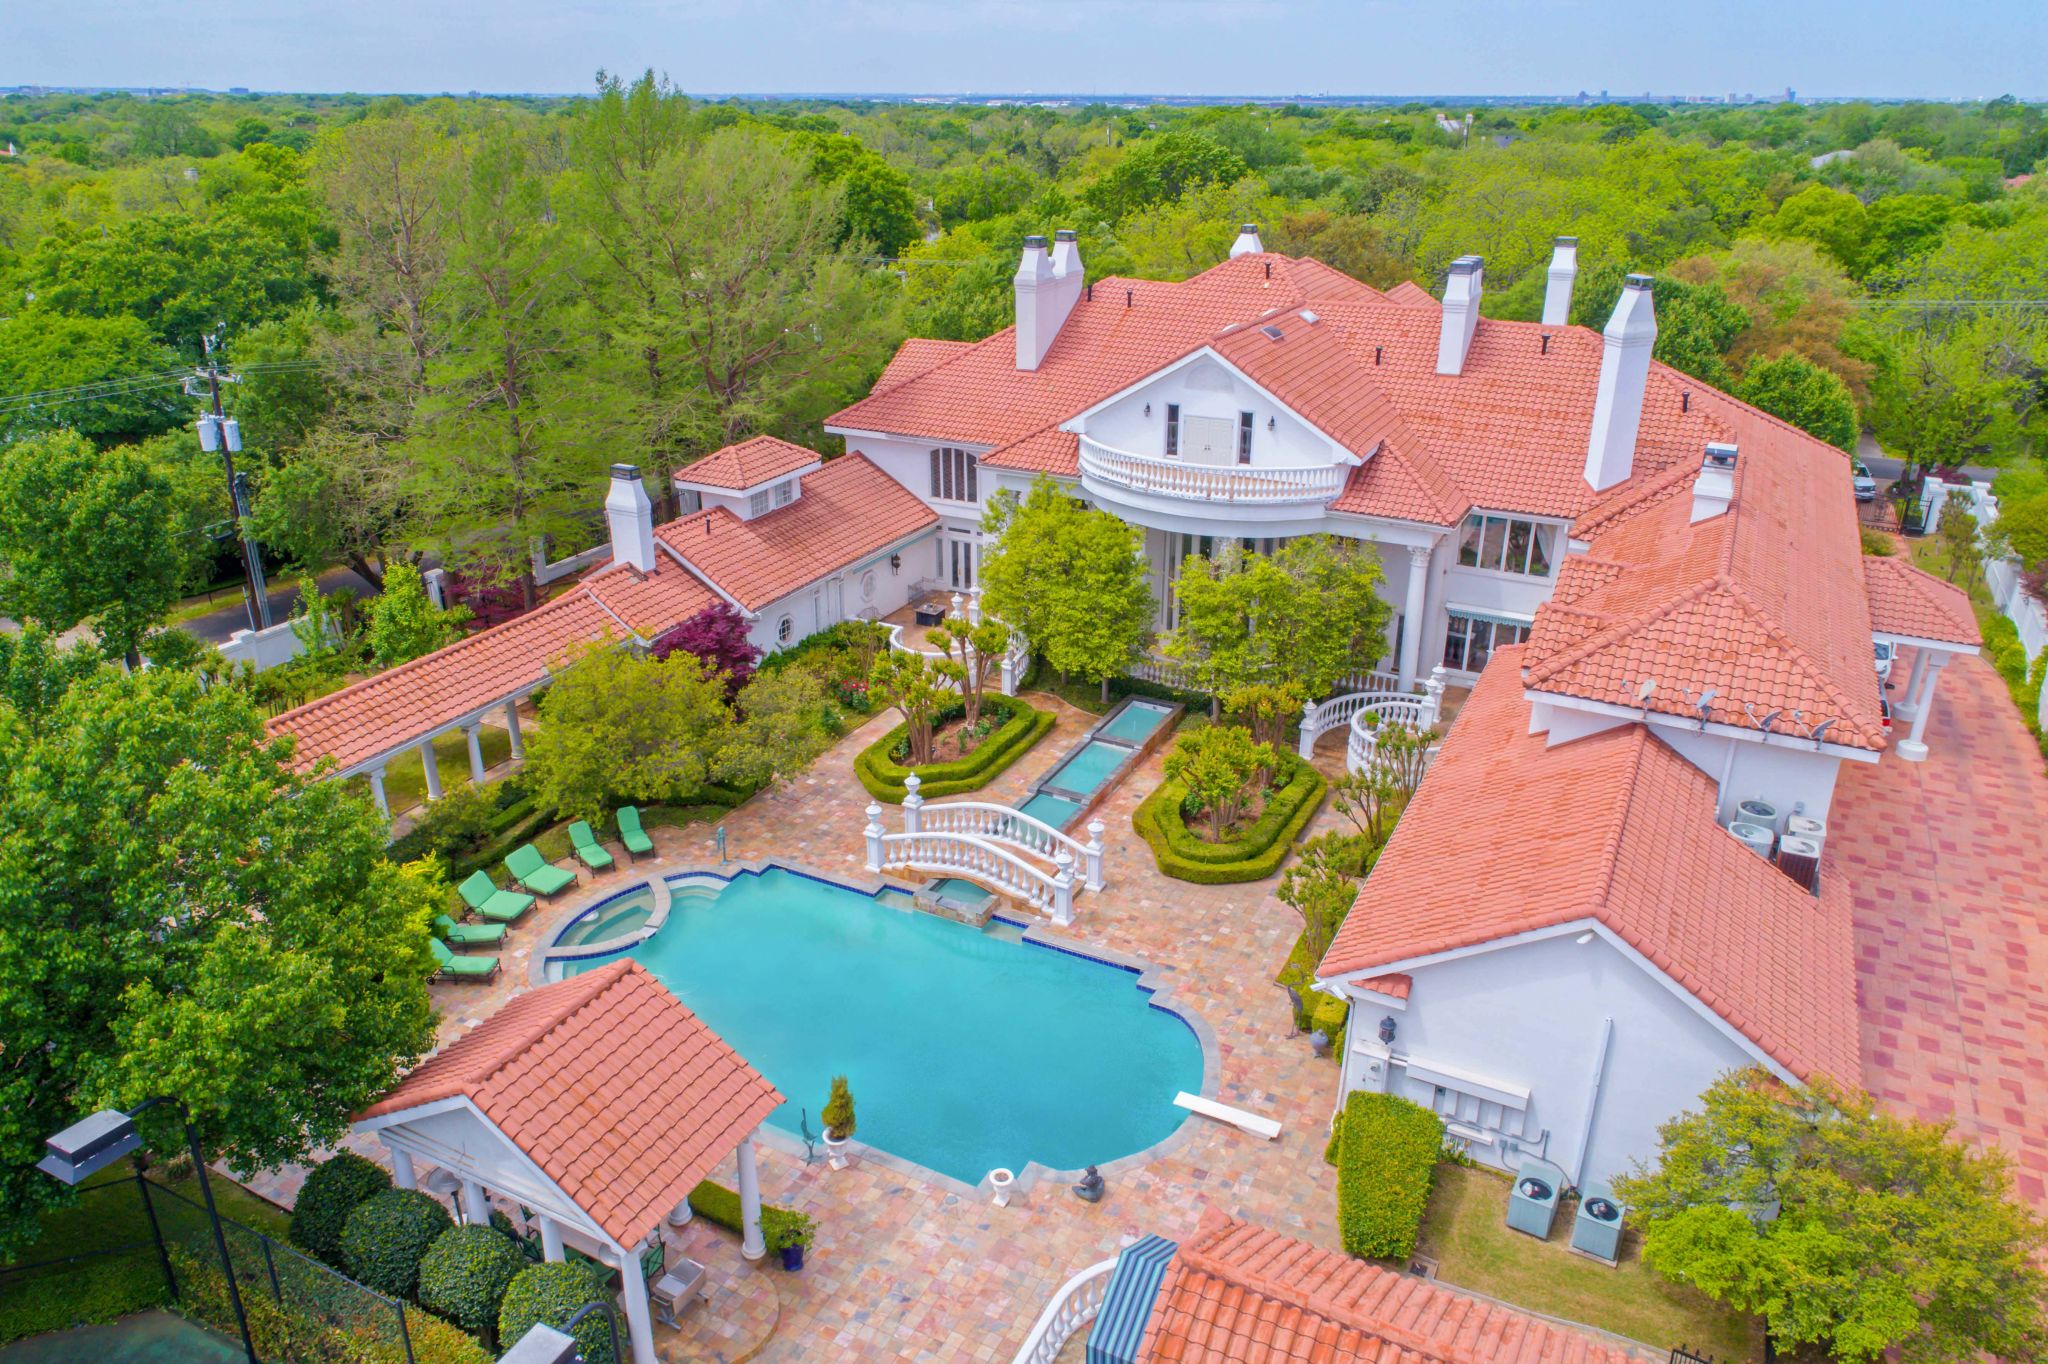 For nearly $13 million, you can own the Texas mansion of your dreams